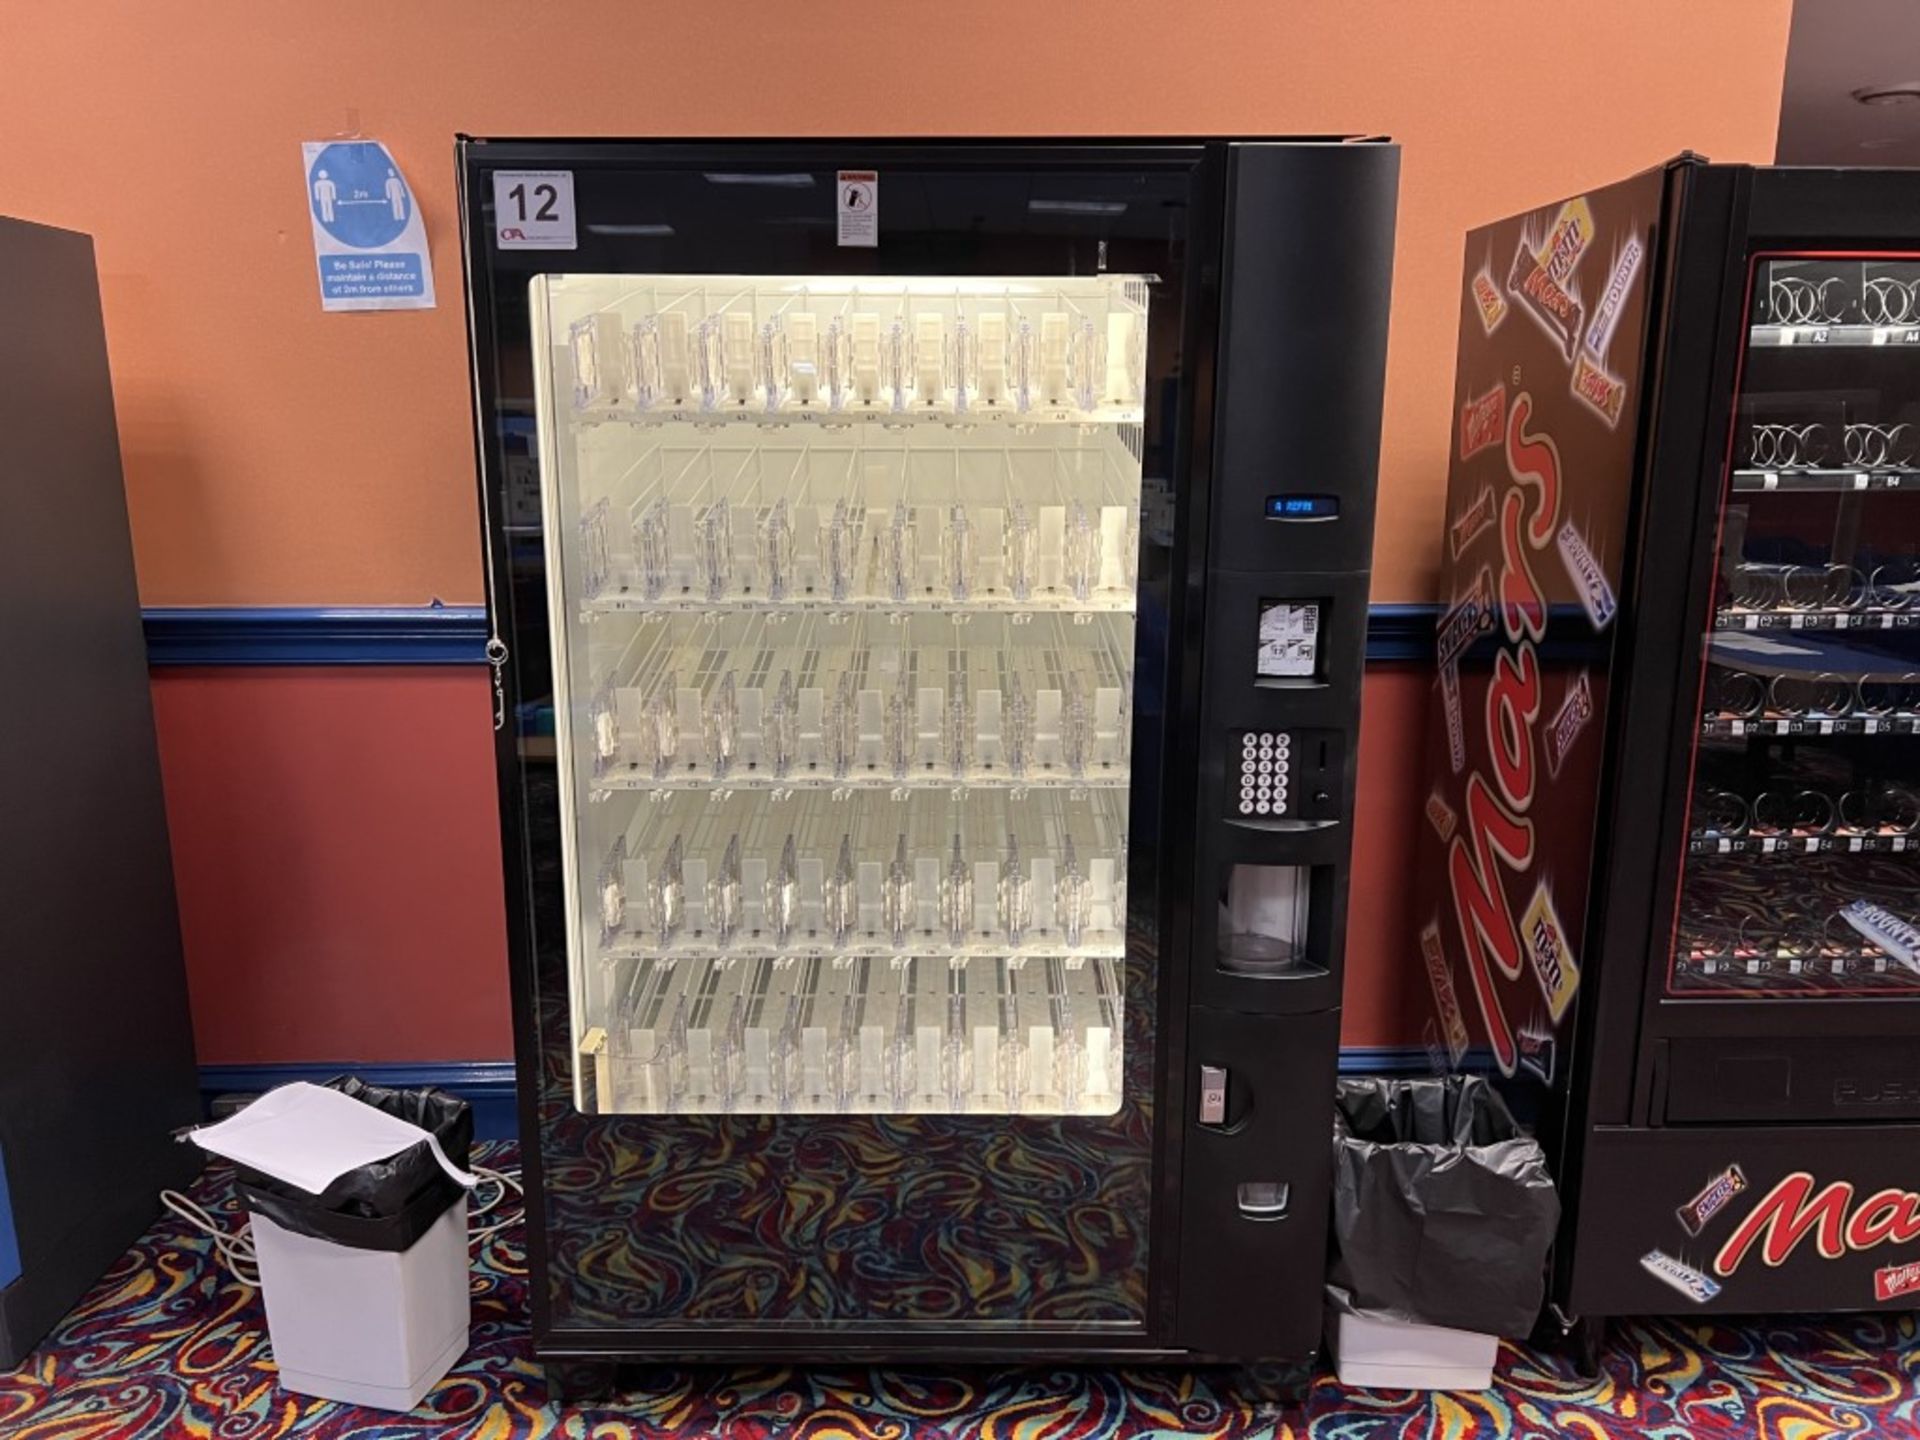 Dixie Narco DN 5800 Coin Operated Chilled Drinks Dispenser